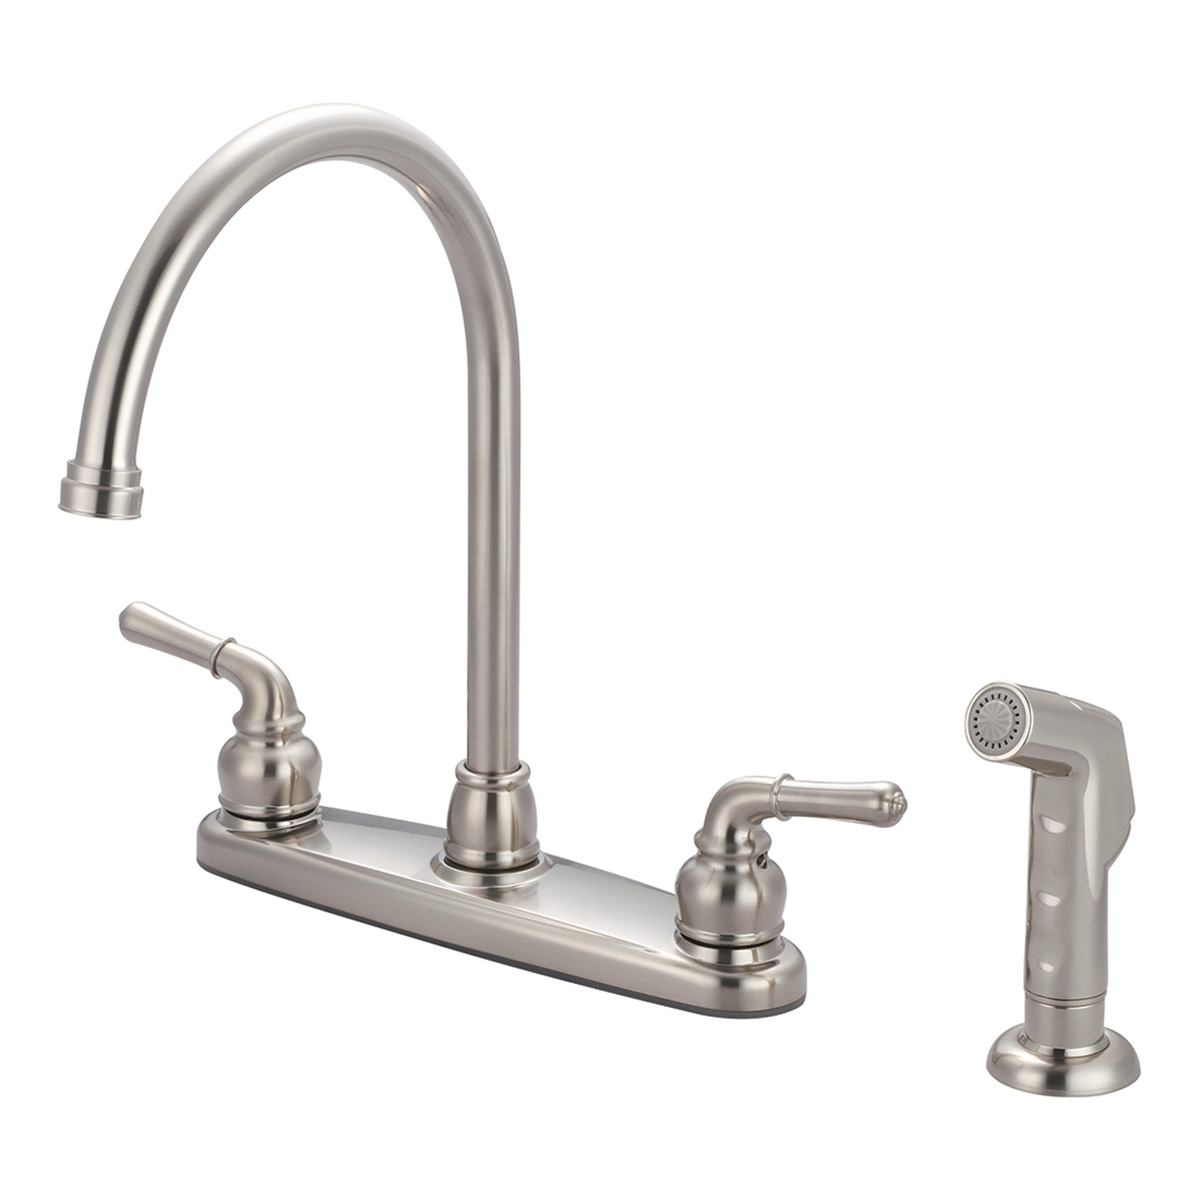 K-5342-bn Two Handle Kitchen Faucet - Brushed Nickel